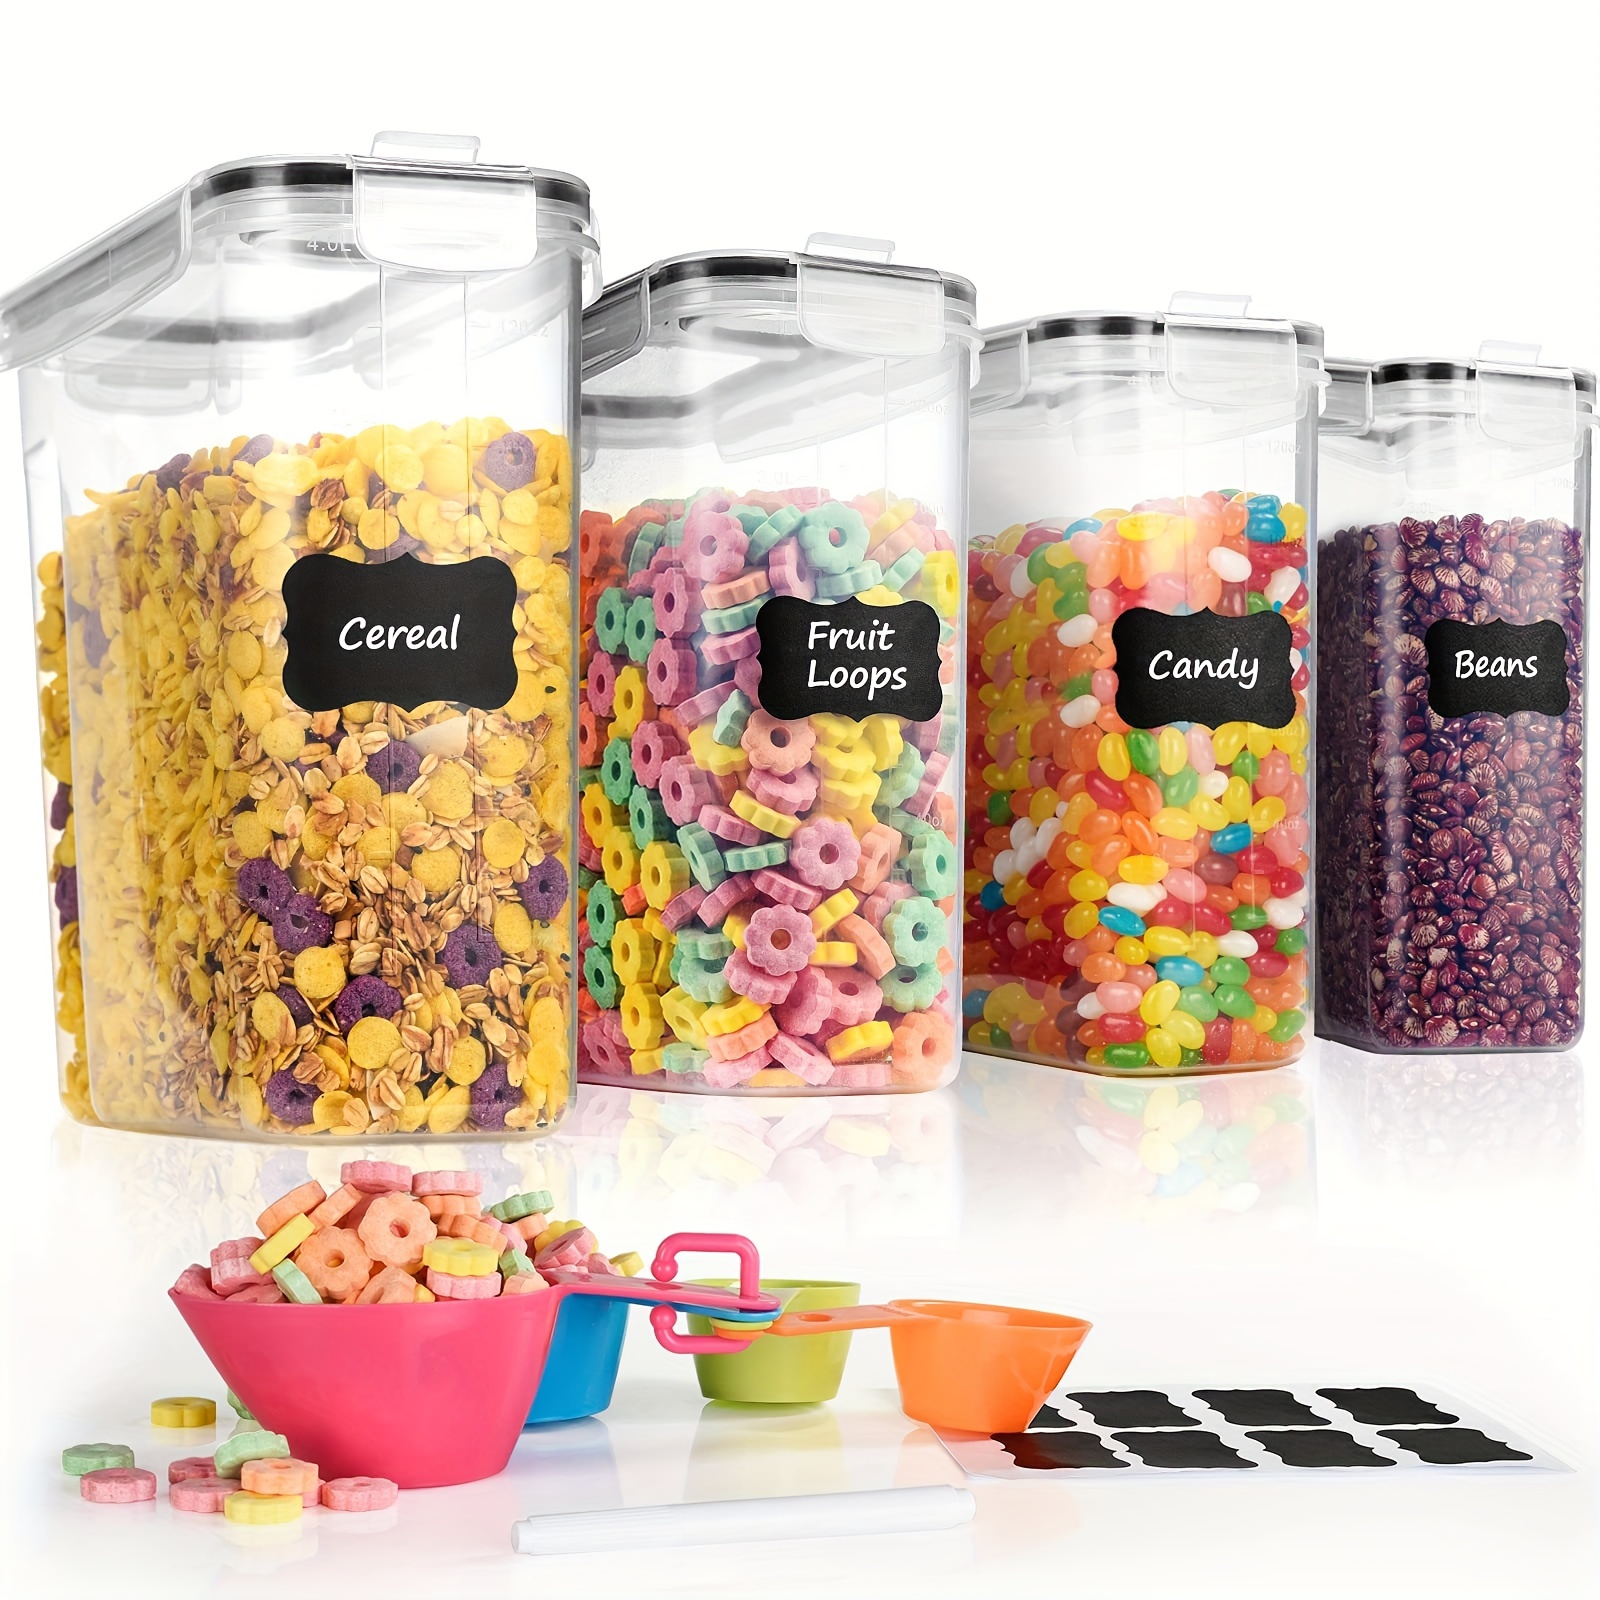 

4pcs Cereal Containers Storage, Airtight Food Storage Containers With Pour Spout For Kitchen & Pantry Organization Storage, Plastic Cereal Dispensers, Measuring Cup & 20 Labels